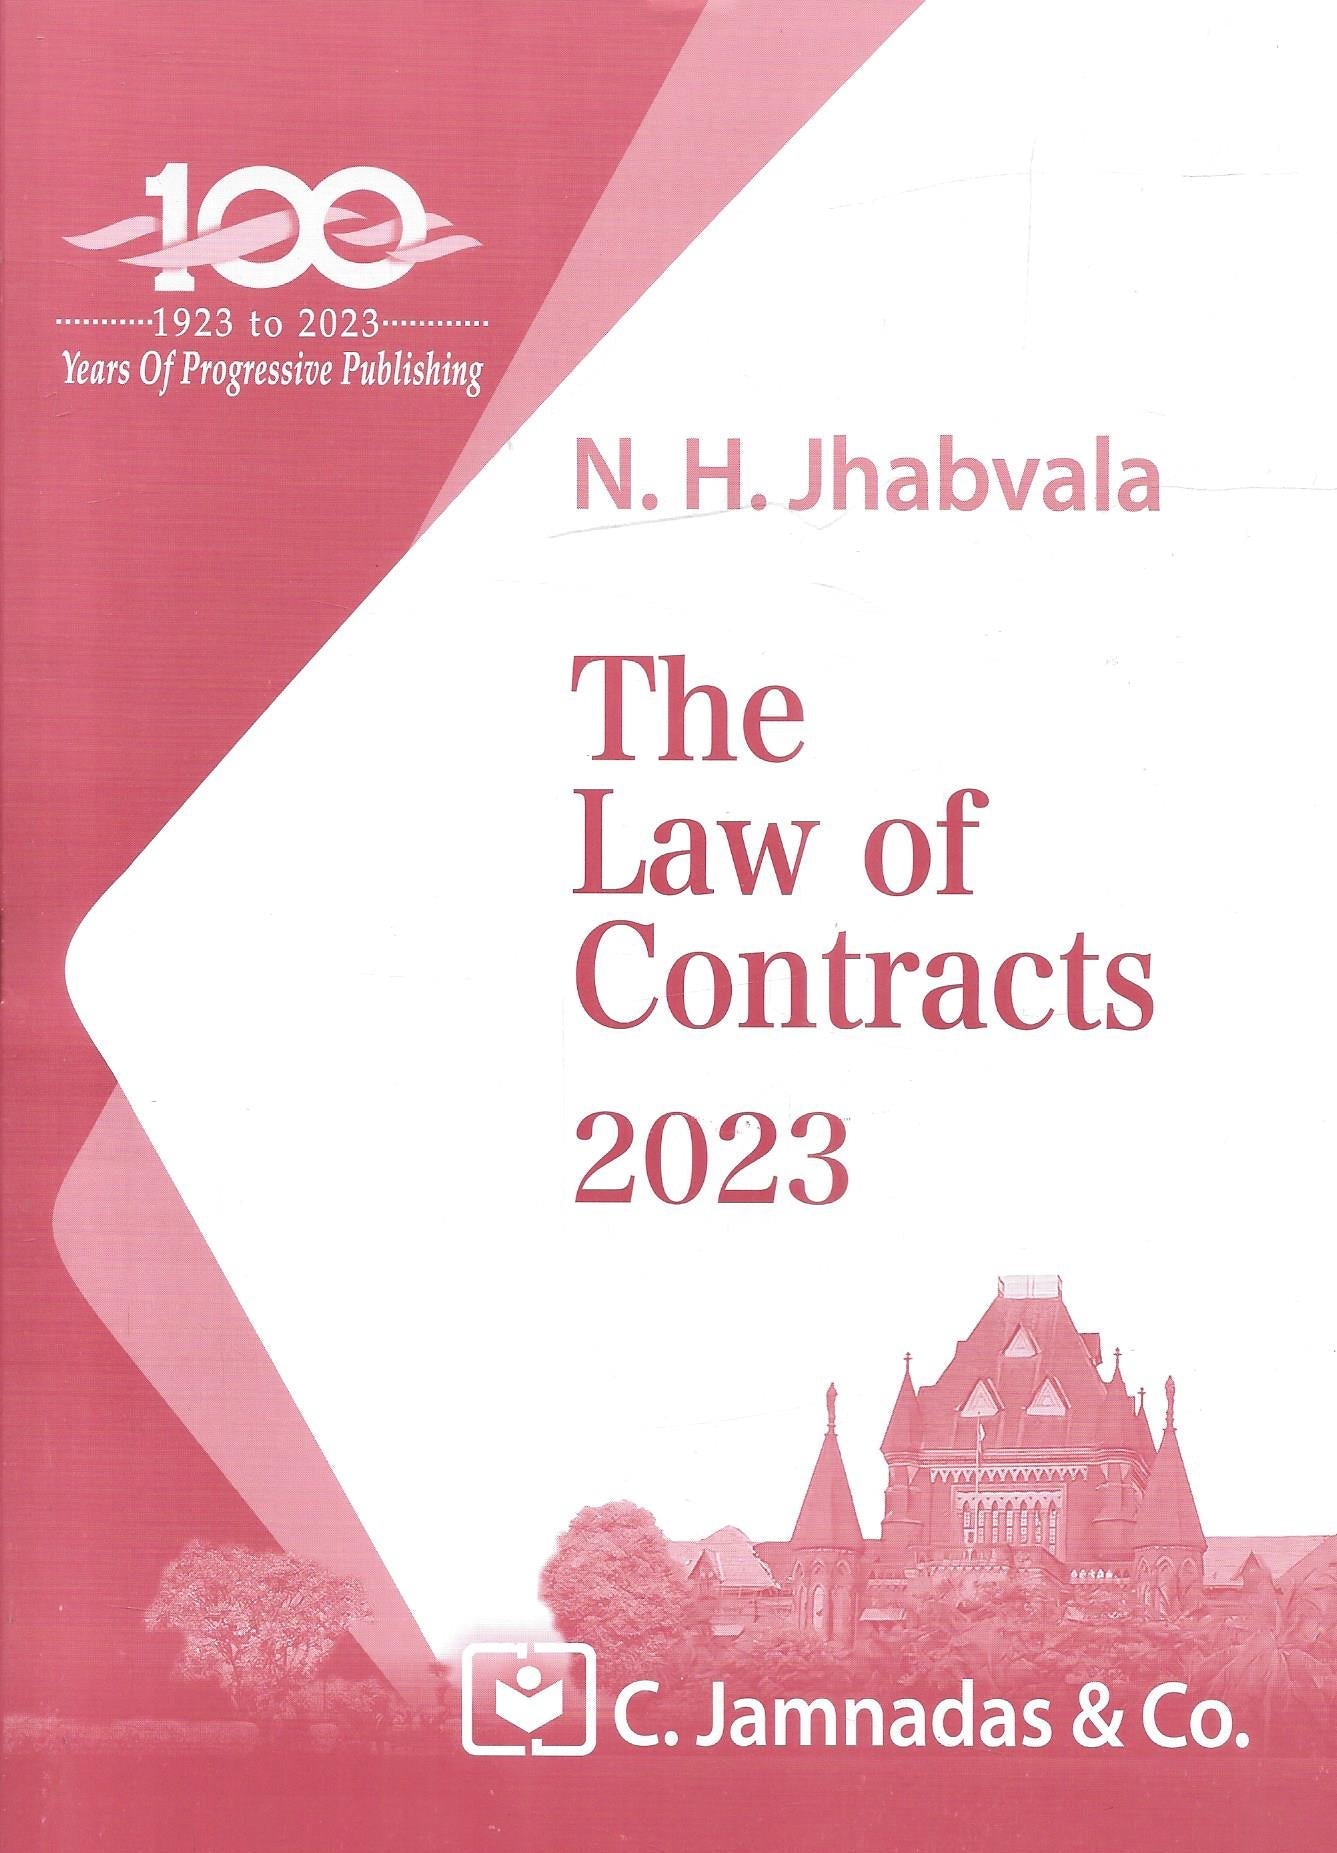 The Law Of Contracts - Jhabvala Series